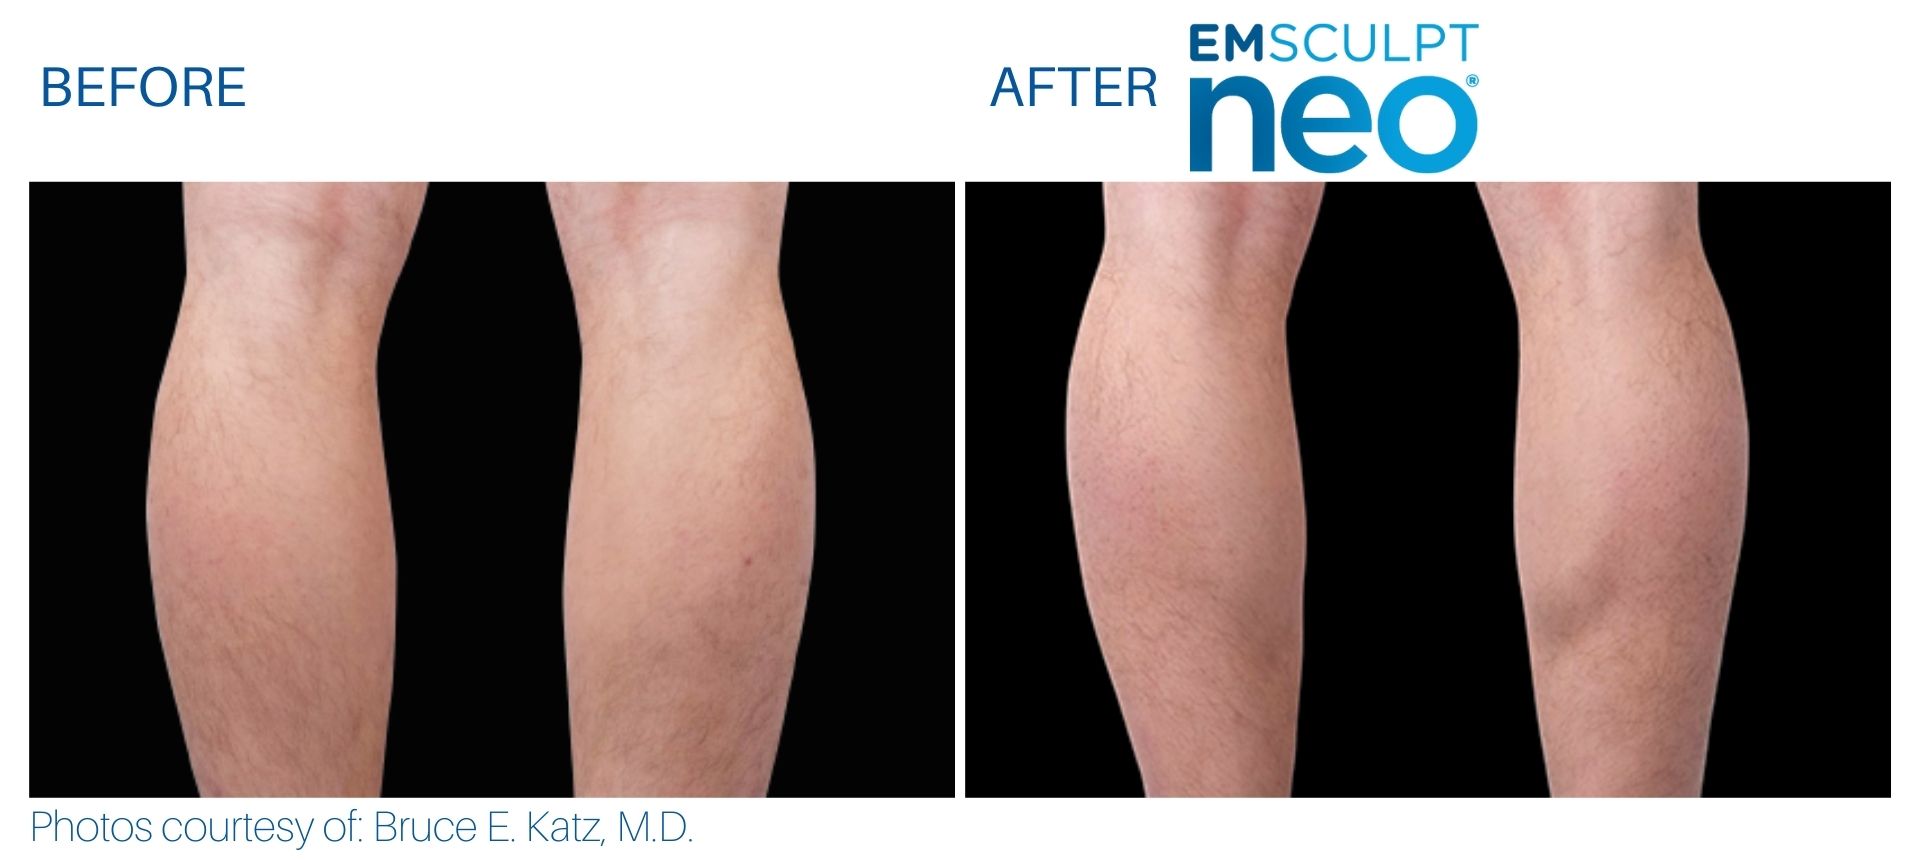 EmSculpt NEO Muscle Building & Fat Burning as low as €300 per session